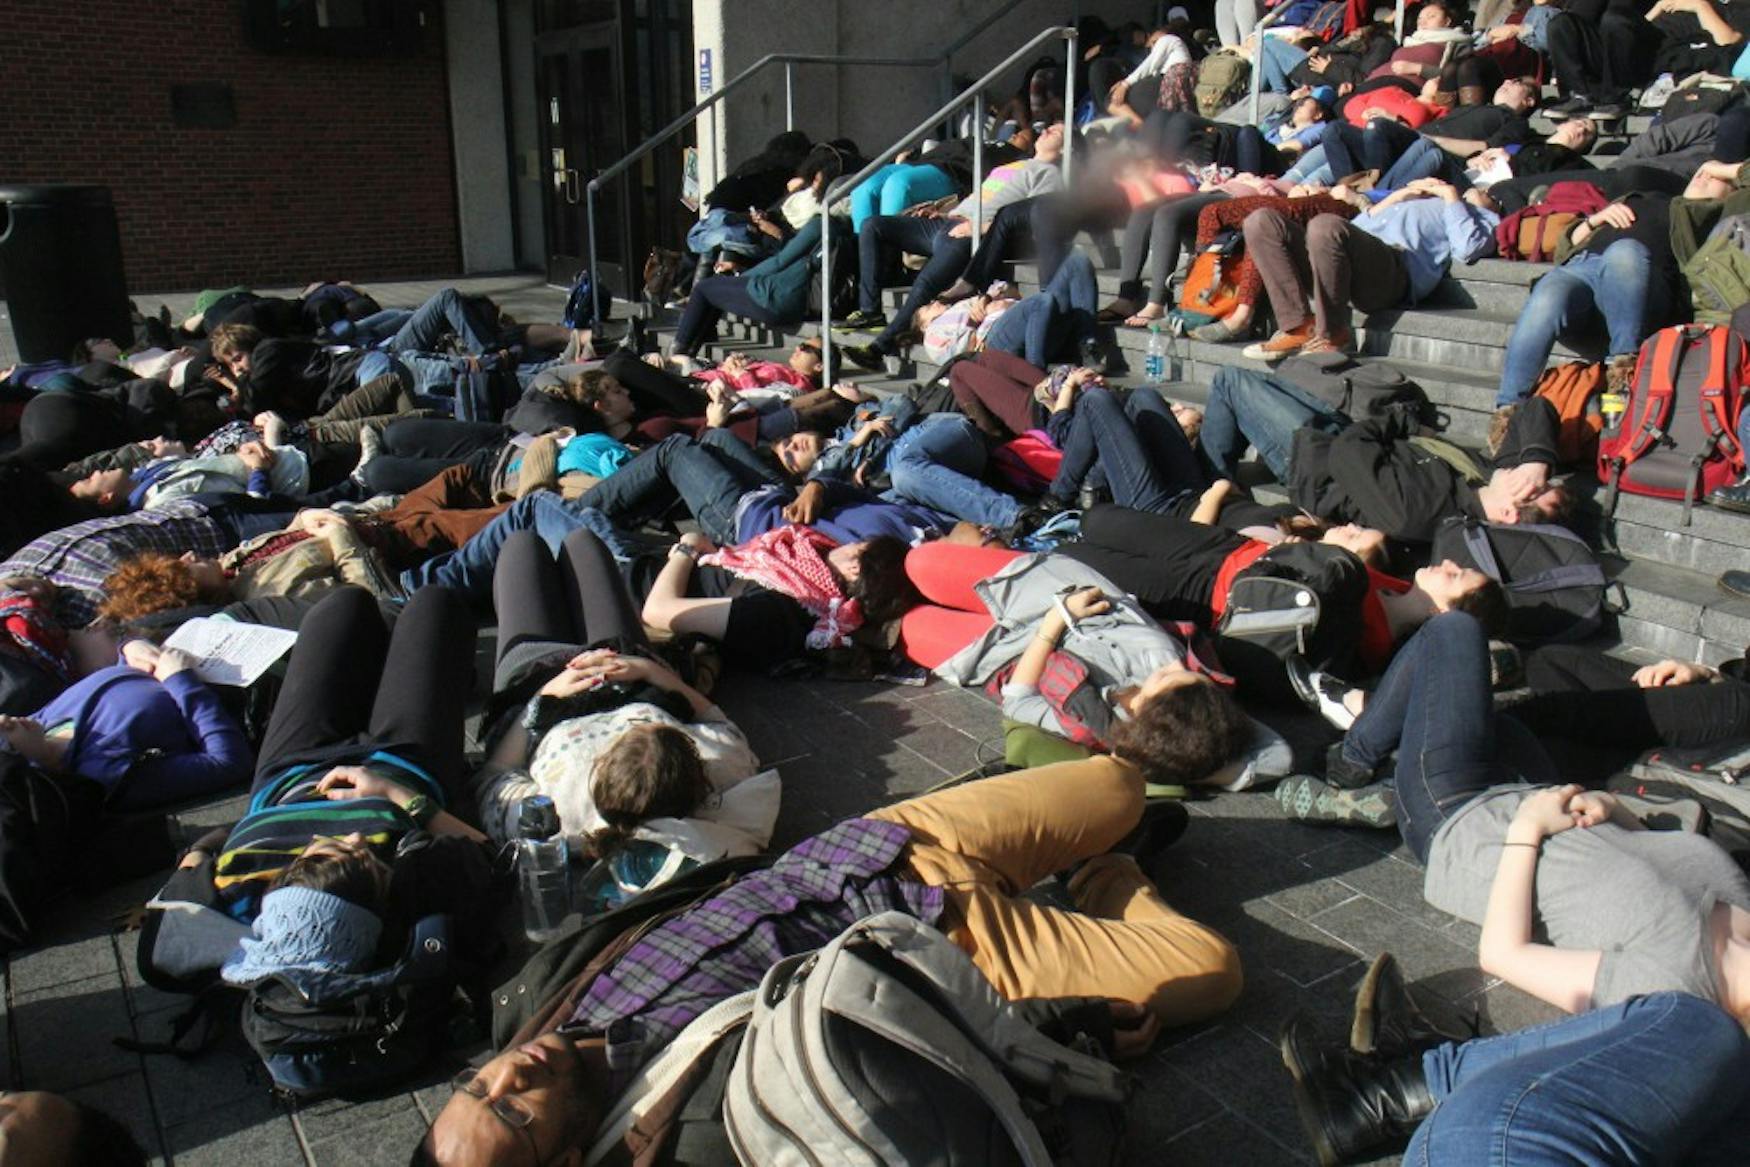 Students participate in "die-in"